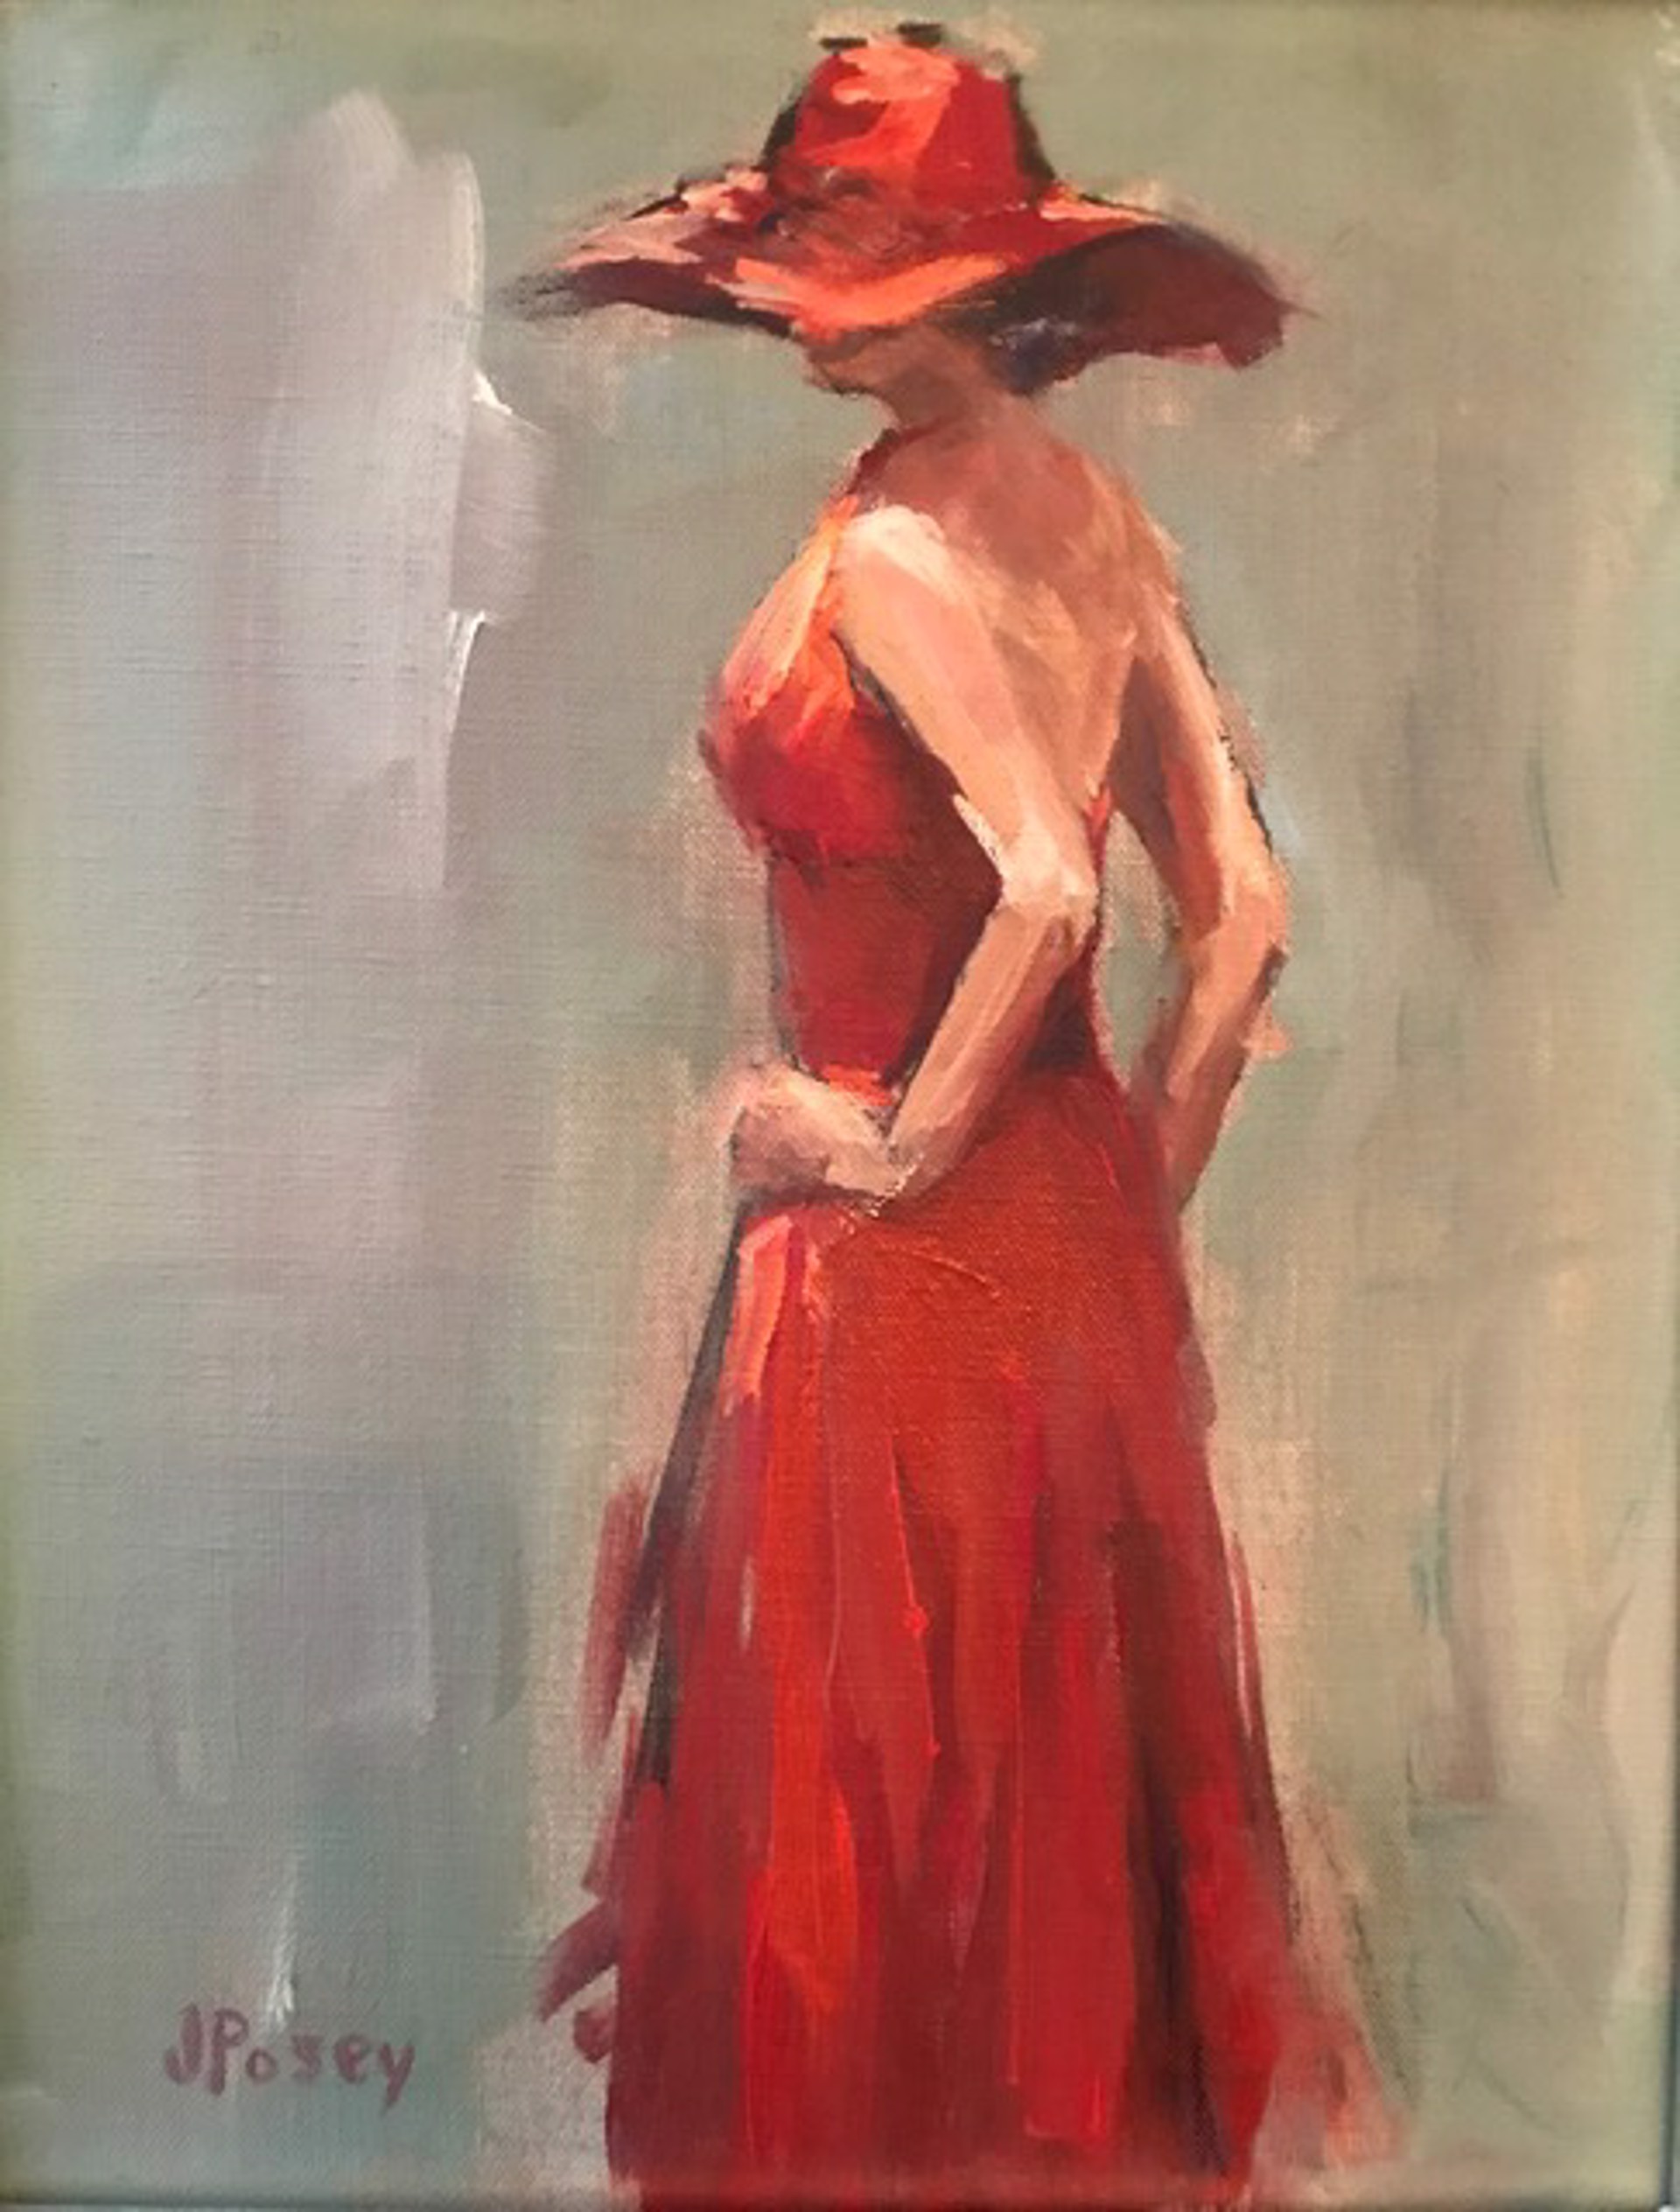 Red Dress by Jeany Posey